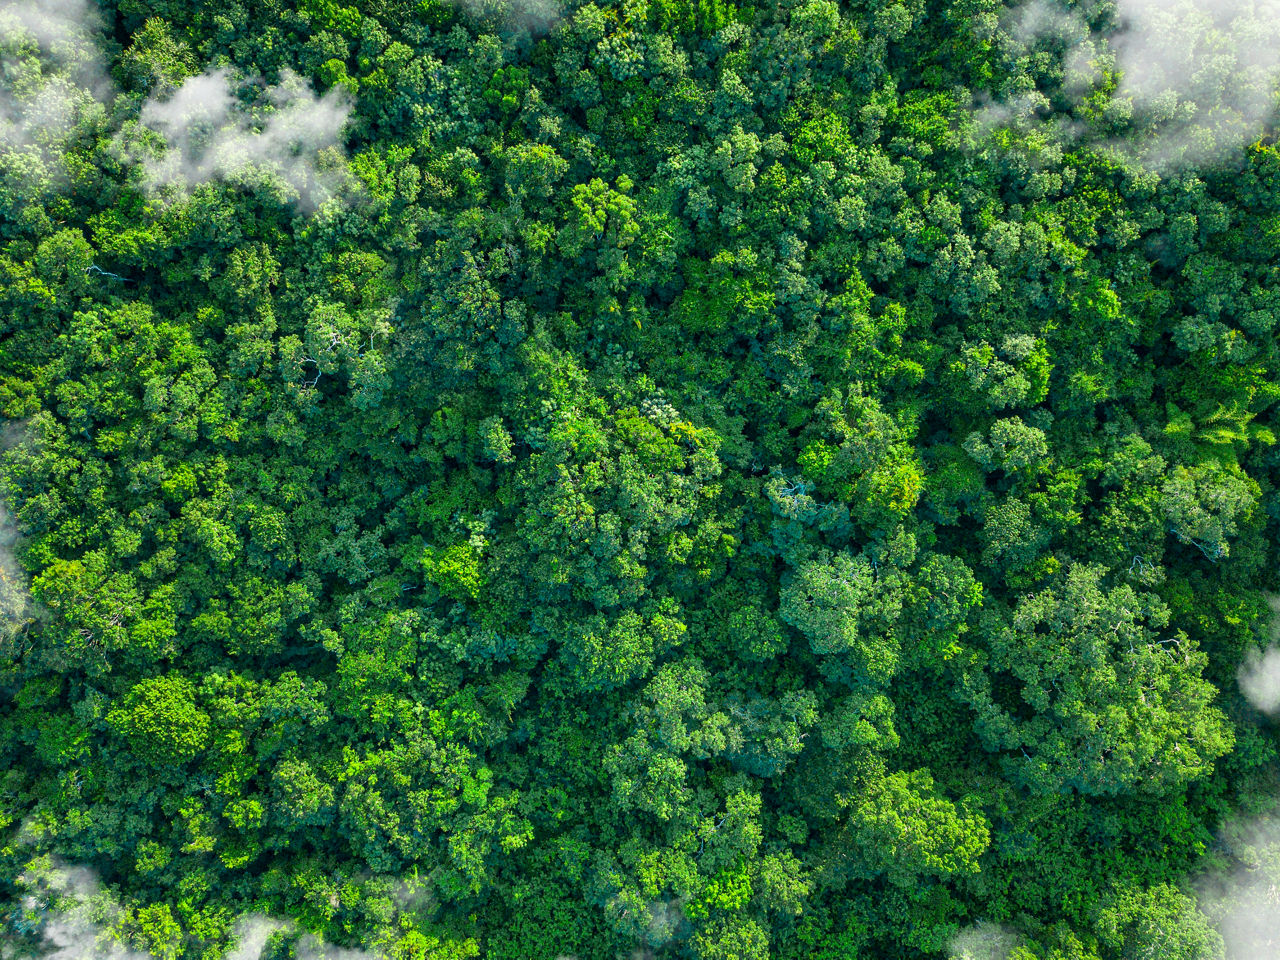 The photo shows a tropical green forest and nature from above with clouds, from a bird's eye view. The green lungs of the earth. The image symbolizes the sustainable use of nature and the importance of nature for people on earth, as well as the rare and precious beauty of untouched nature.
Impact of human activities on nature and the environment. Innovative ideas and promotion of sustainability. Sustainable Development. Carbon-neutral, CO2-free, low-carbon power generation, Eco-Friendly Business Idea. Environment-friendly Company Supply chains and manufacturing processes reducing gobal ecological Footprint. Environmental regulations. Making Value Chains Sustainable. Green Technology development. ESG-Investing, green investment funds and stocks, green climate fund, Sustainable investment products, Impact funds, Impact investing, ESG-Ratings, ESG Score. Green Business. Environmentally sustainable companies. Investing with a good conscience. Responsible Investing.